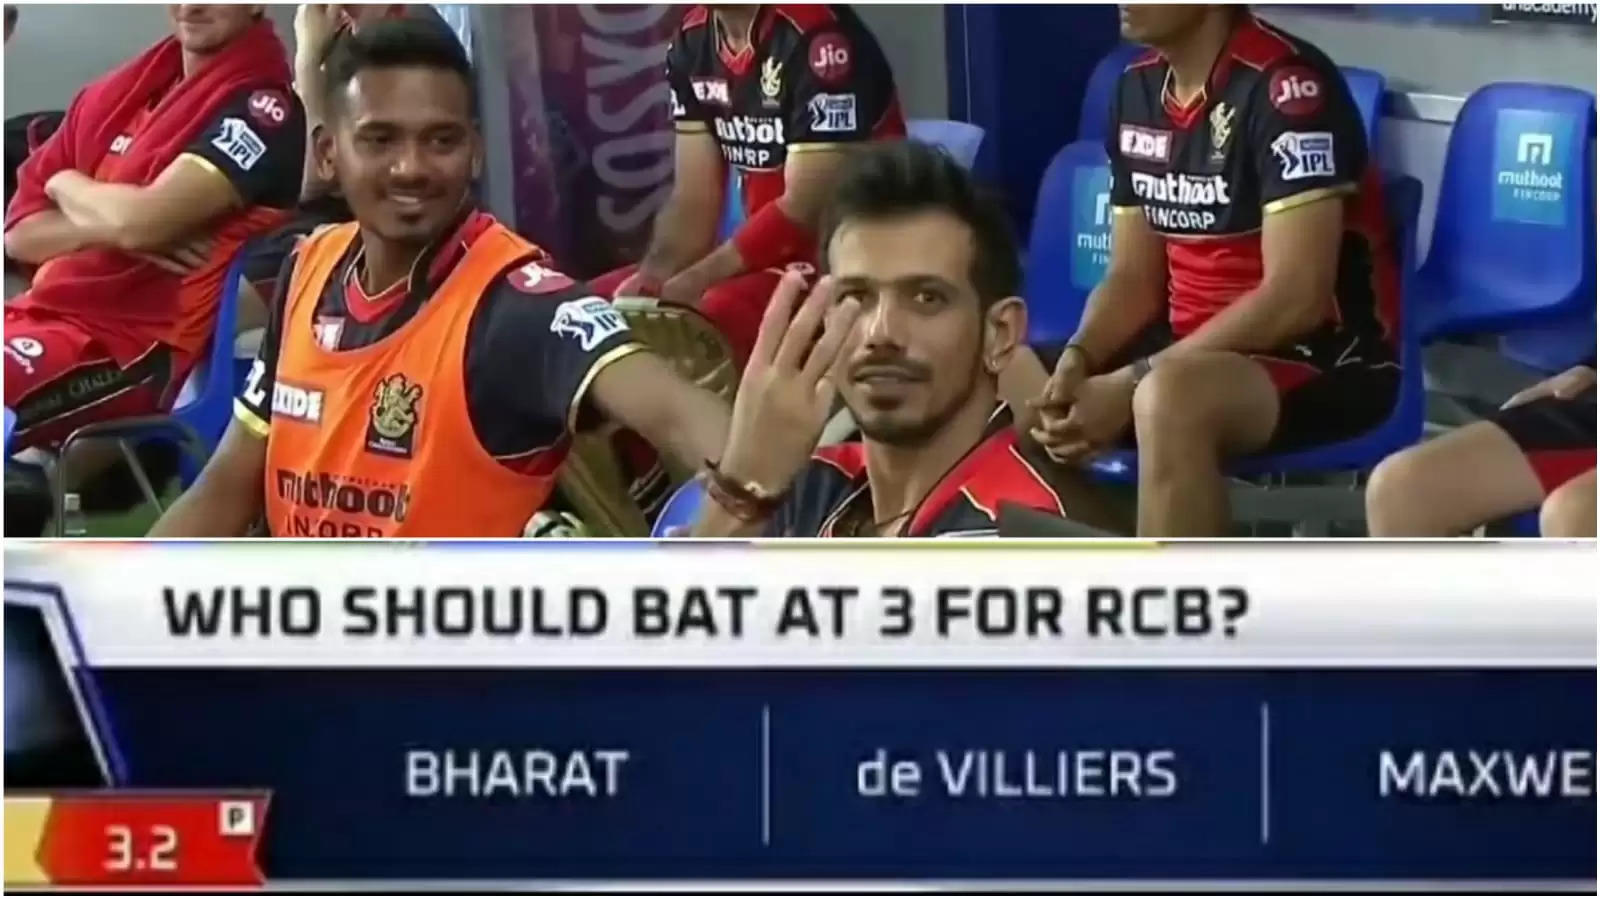 WATCH: Yuzvendra Chahal hilariously indicates to viewers that he is RCB’s No.3 to help with poll question